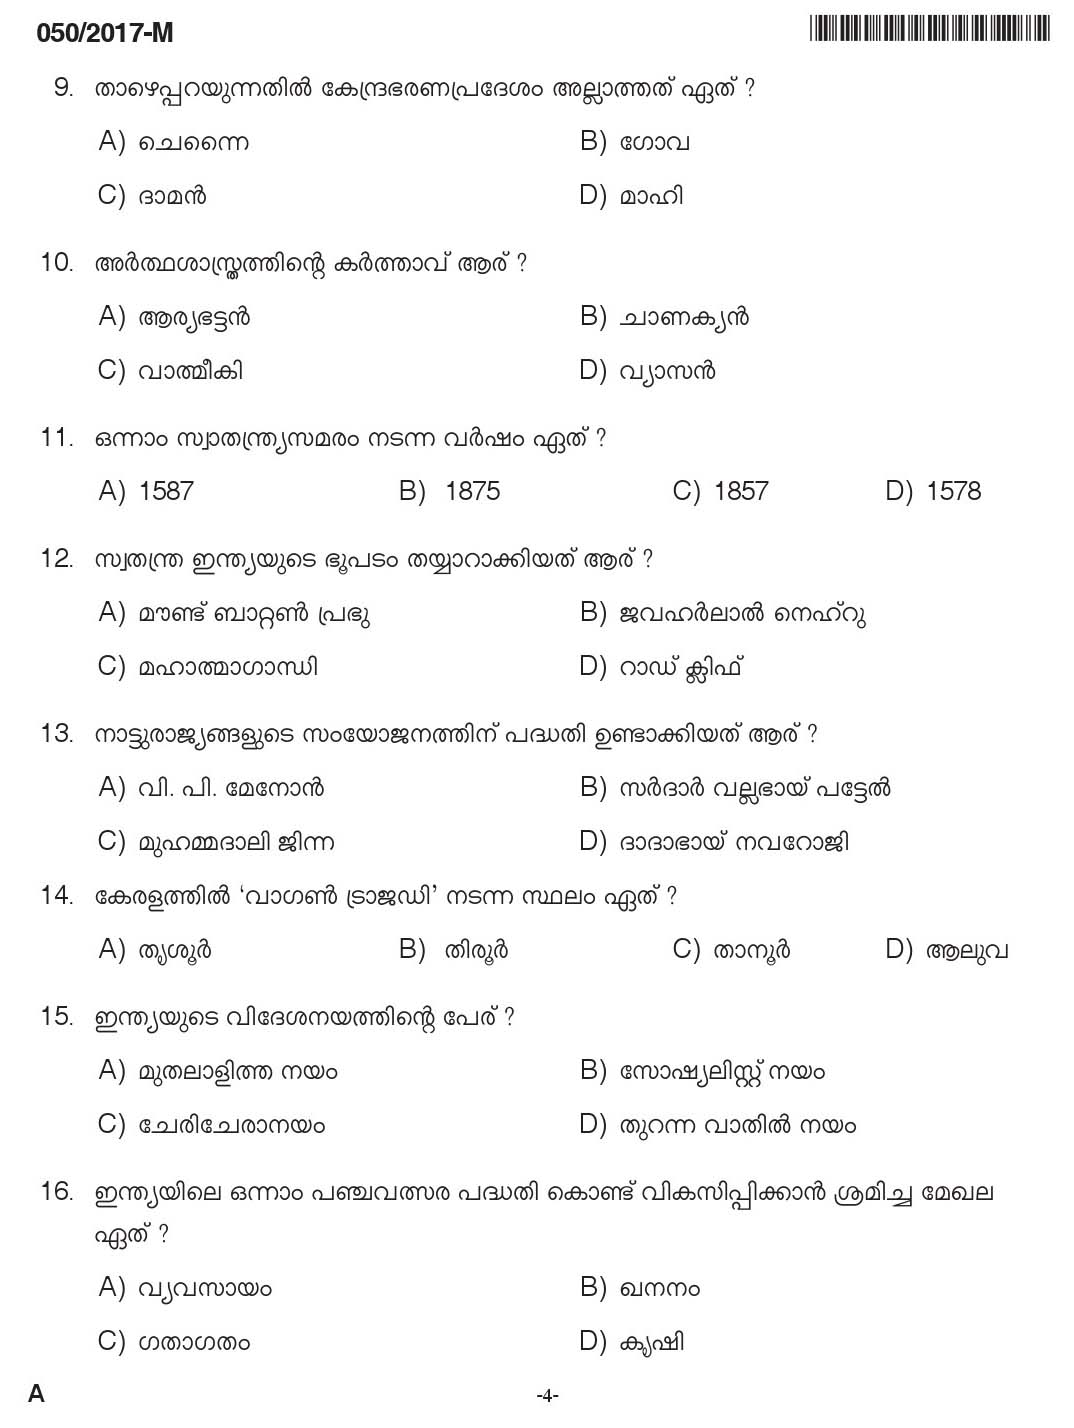 LD Clerk Question Paper 2017 Malayalam Paper Code 0502017 M 3